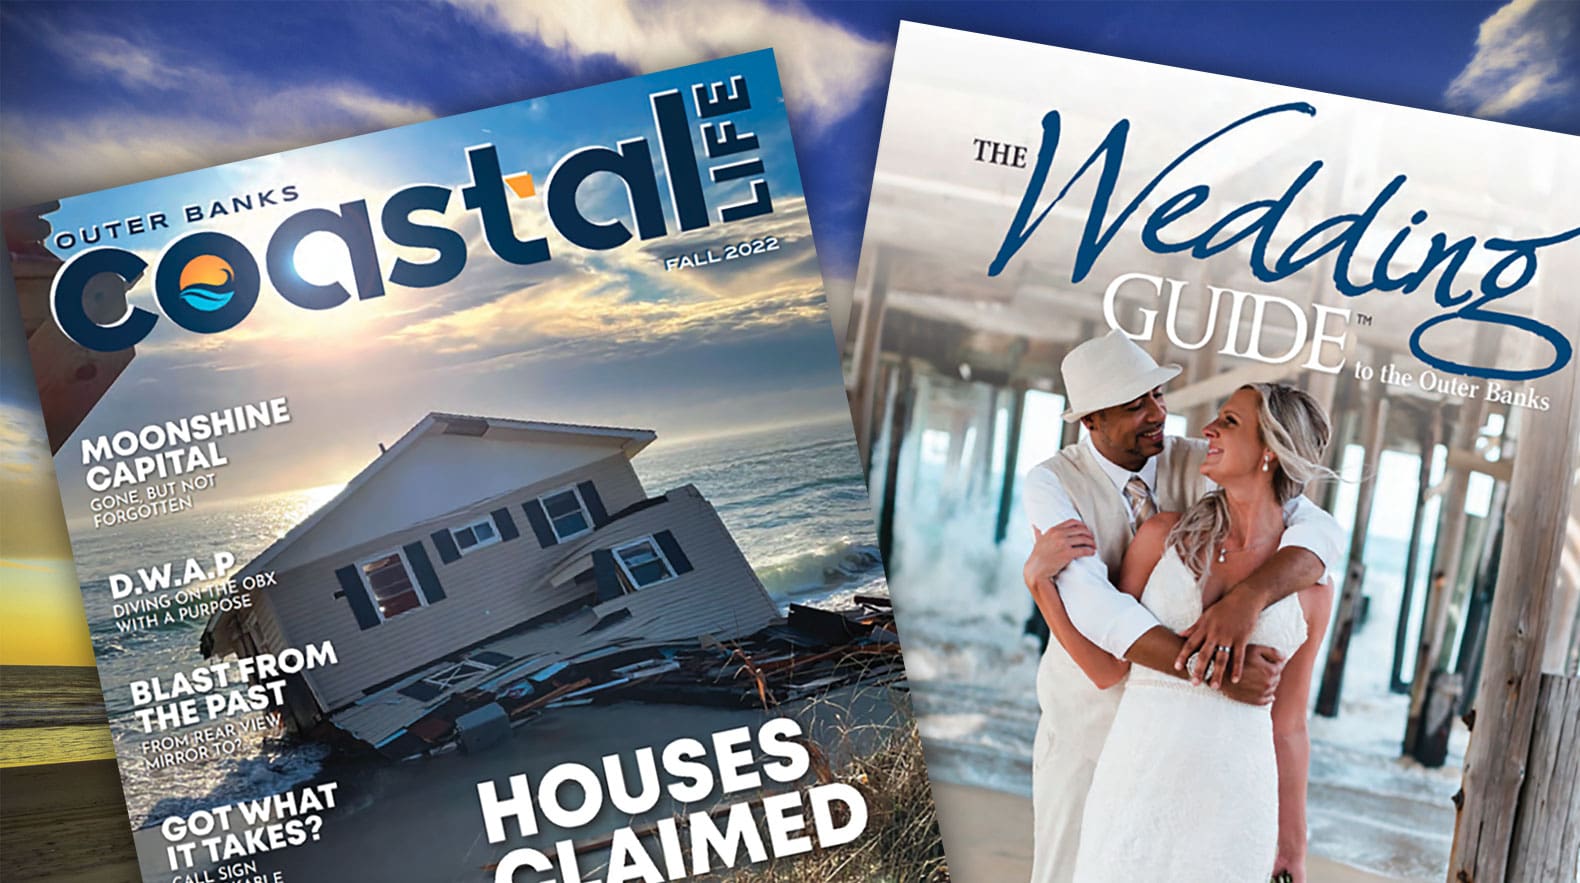 outer banks coastal life and outer banks wedding guide